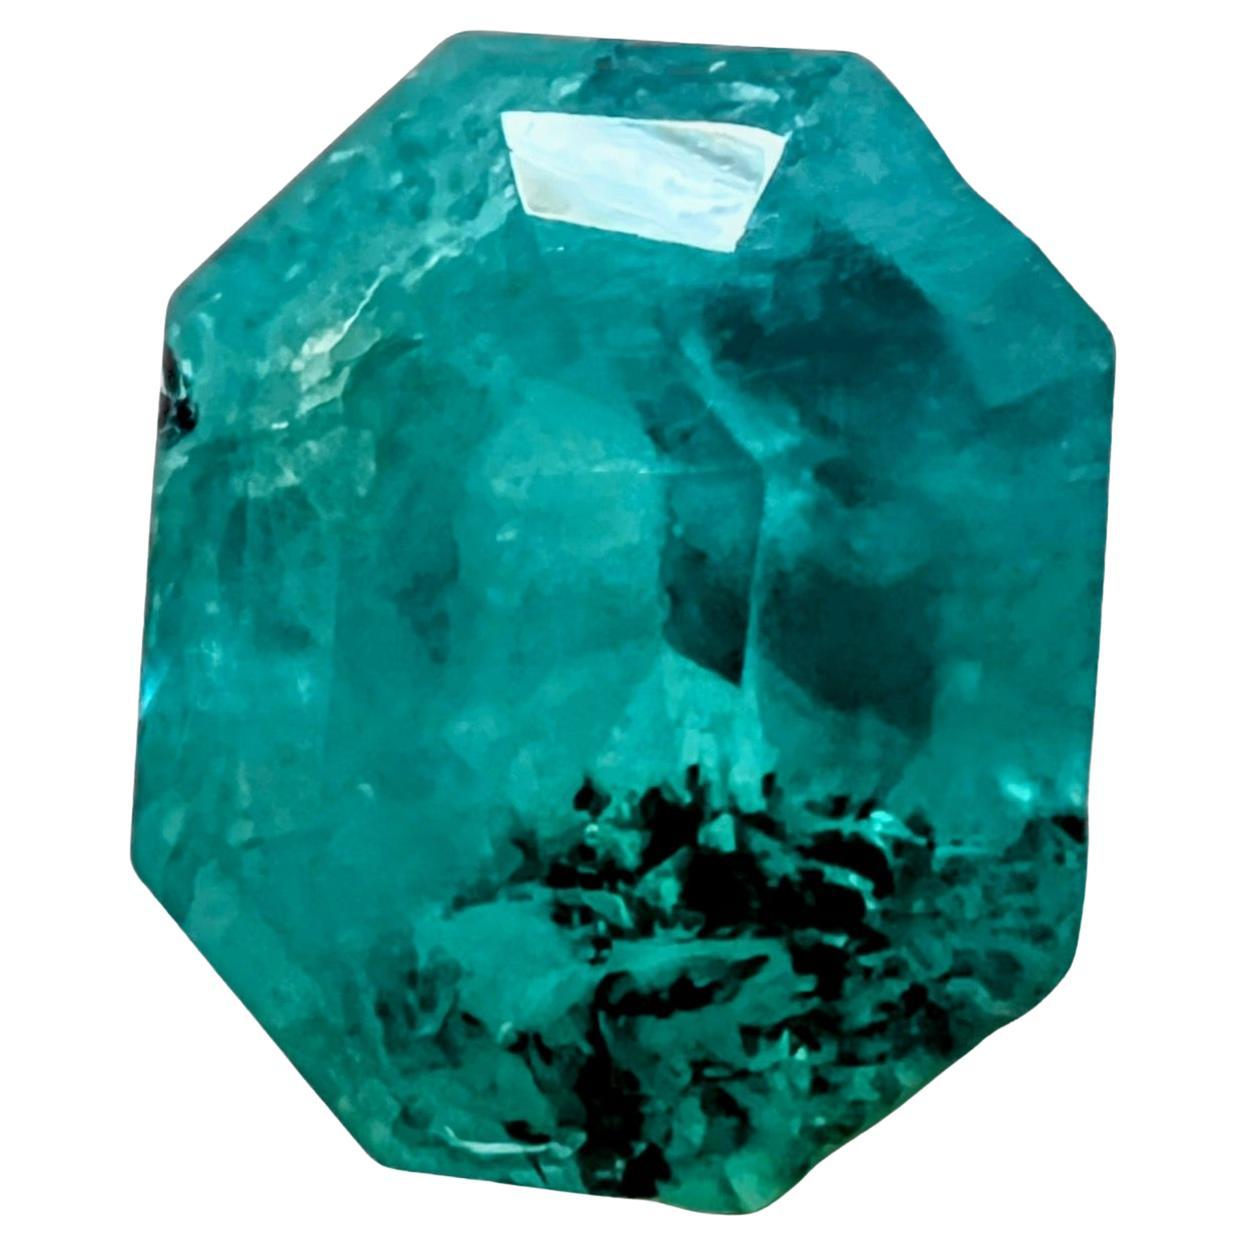 NO RESERVE 3.28ct Radiant Cut NO-OIL Untreated EMERALD Gemstone For Sale